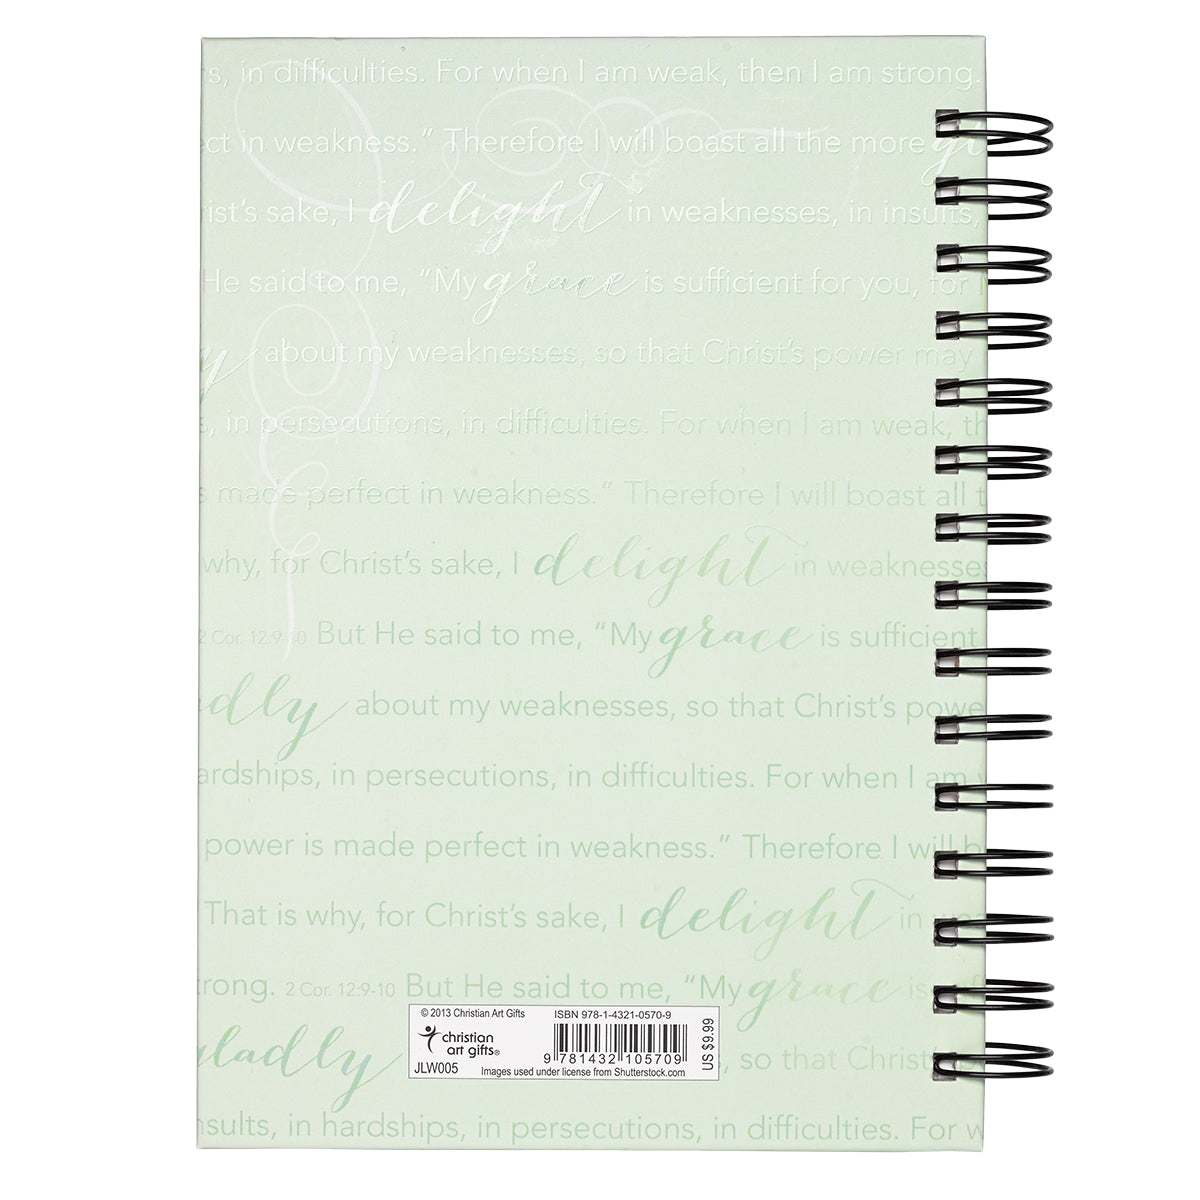 Image of "His Grace Is Sufficient" Wirebound Journal other